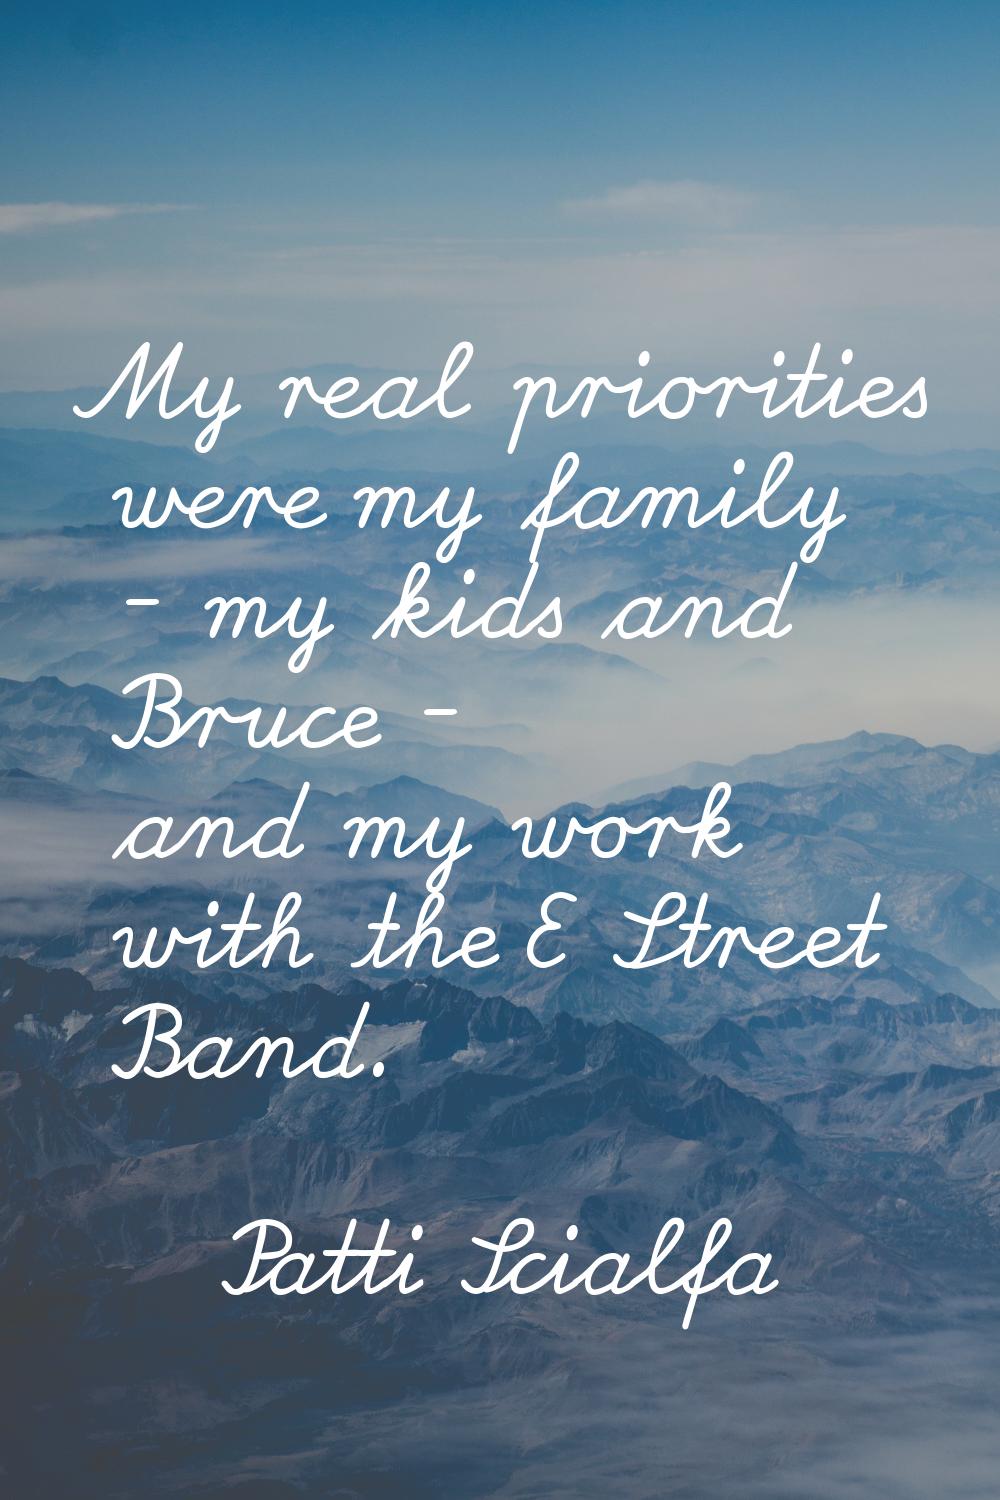 My real priorities were my family - my kids and Bruce - and my work with the E Street Band.